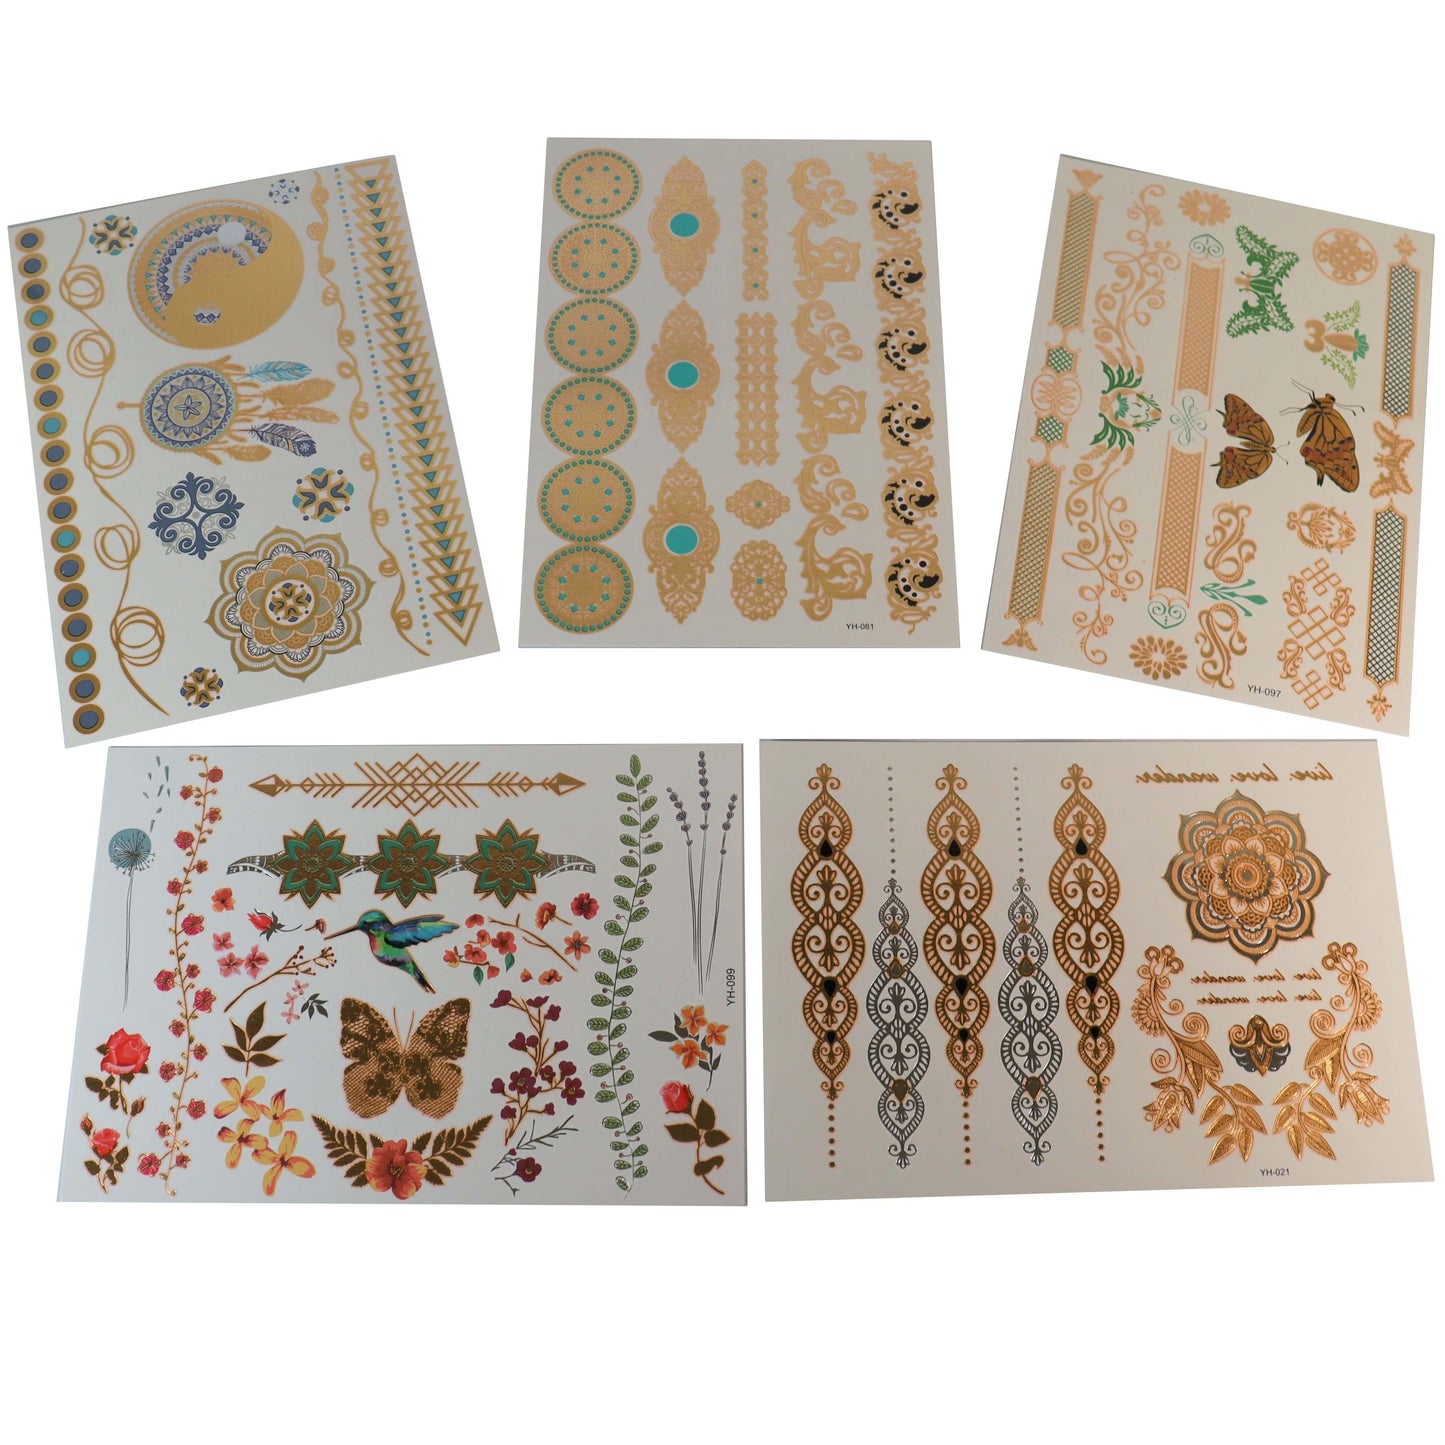 Temporary Tattoo Set - High Quality and Long-Lasting